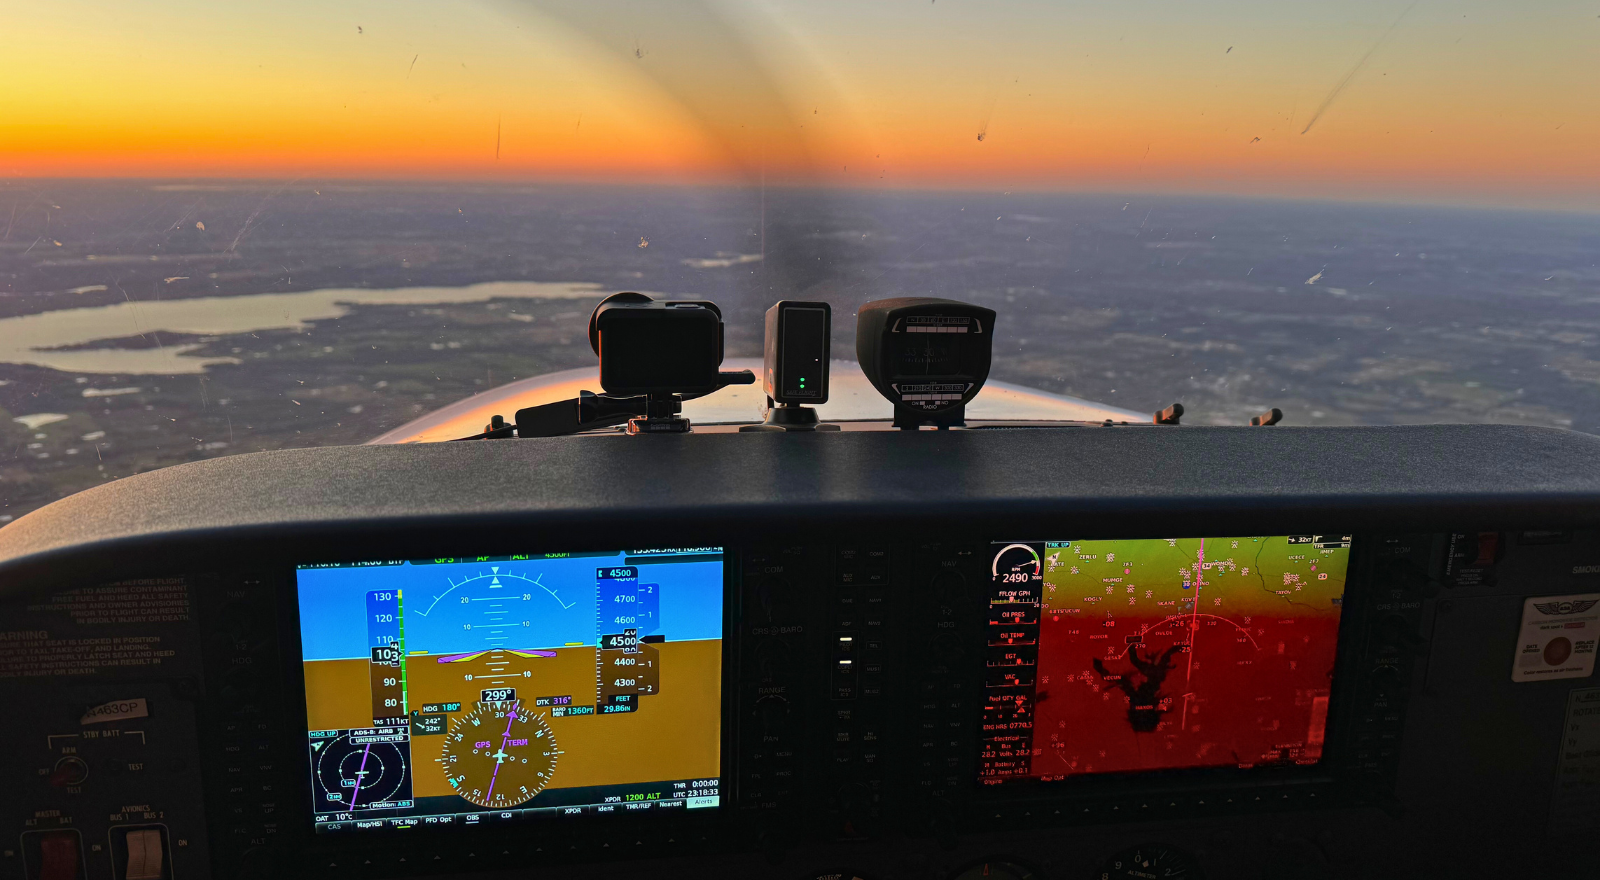 Enroll in FAA WINGS Program: Don’t Just Wing Your Comms Training